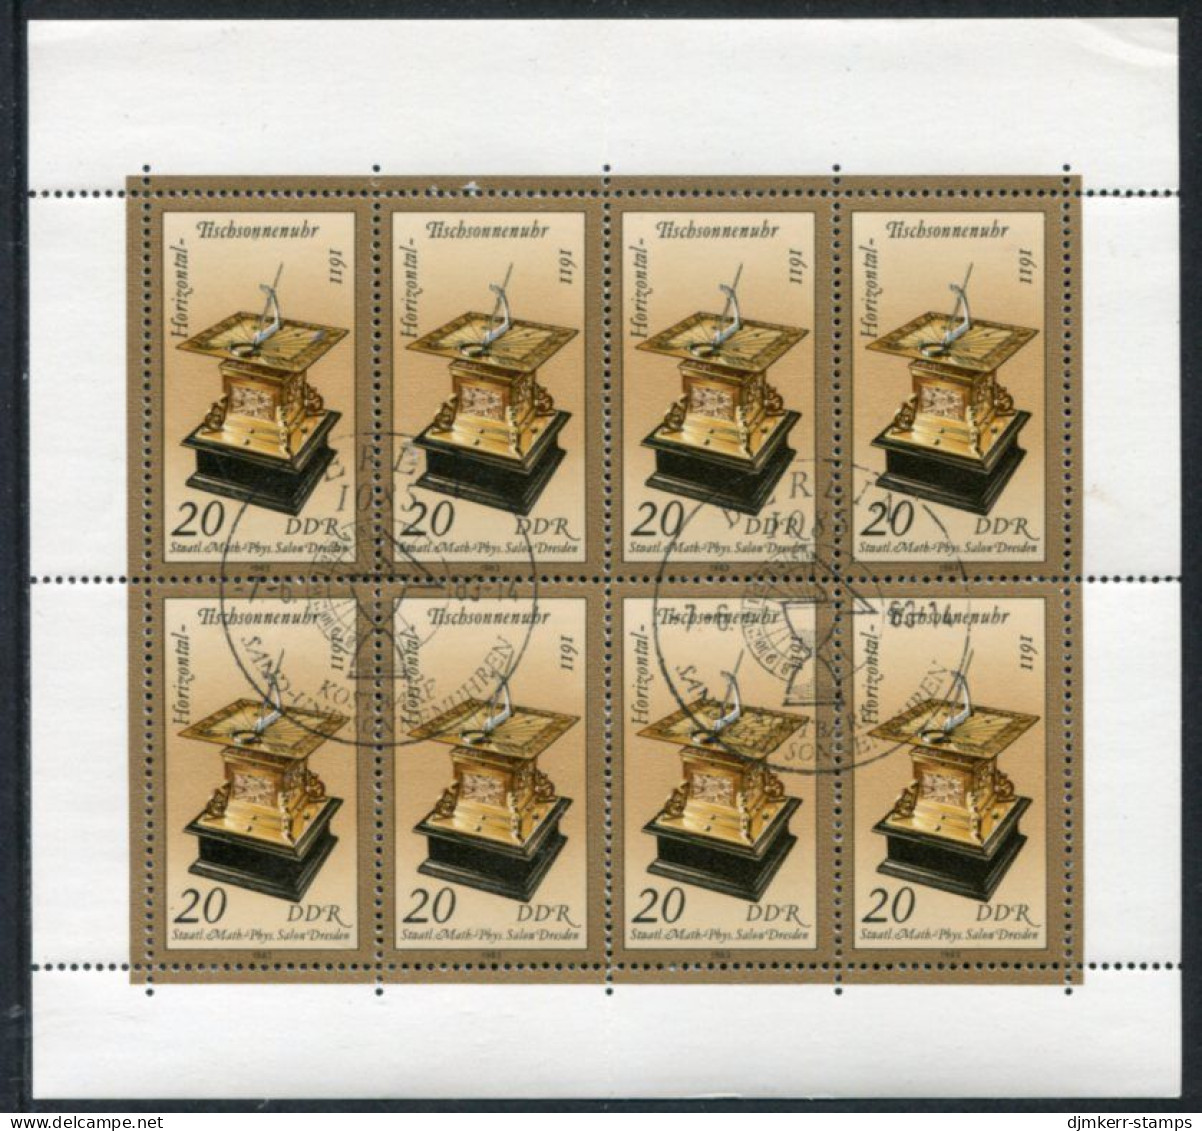 DDR 1983  Antique Sundials 20 Pf. Sheetlet Used.  Michel 2798 Kb - Used Stamps